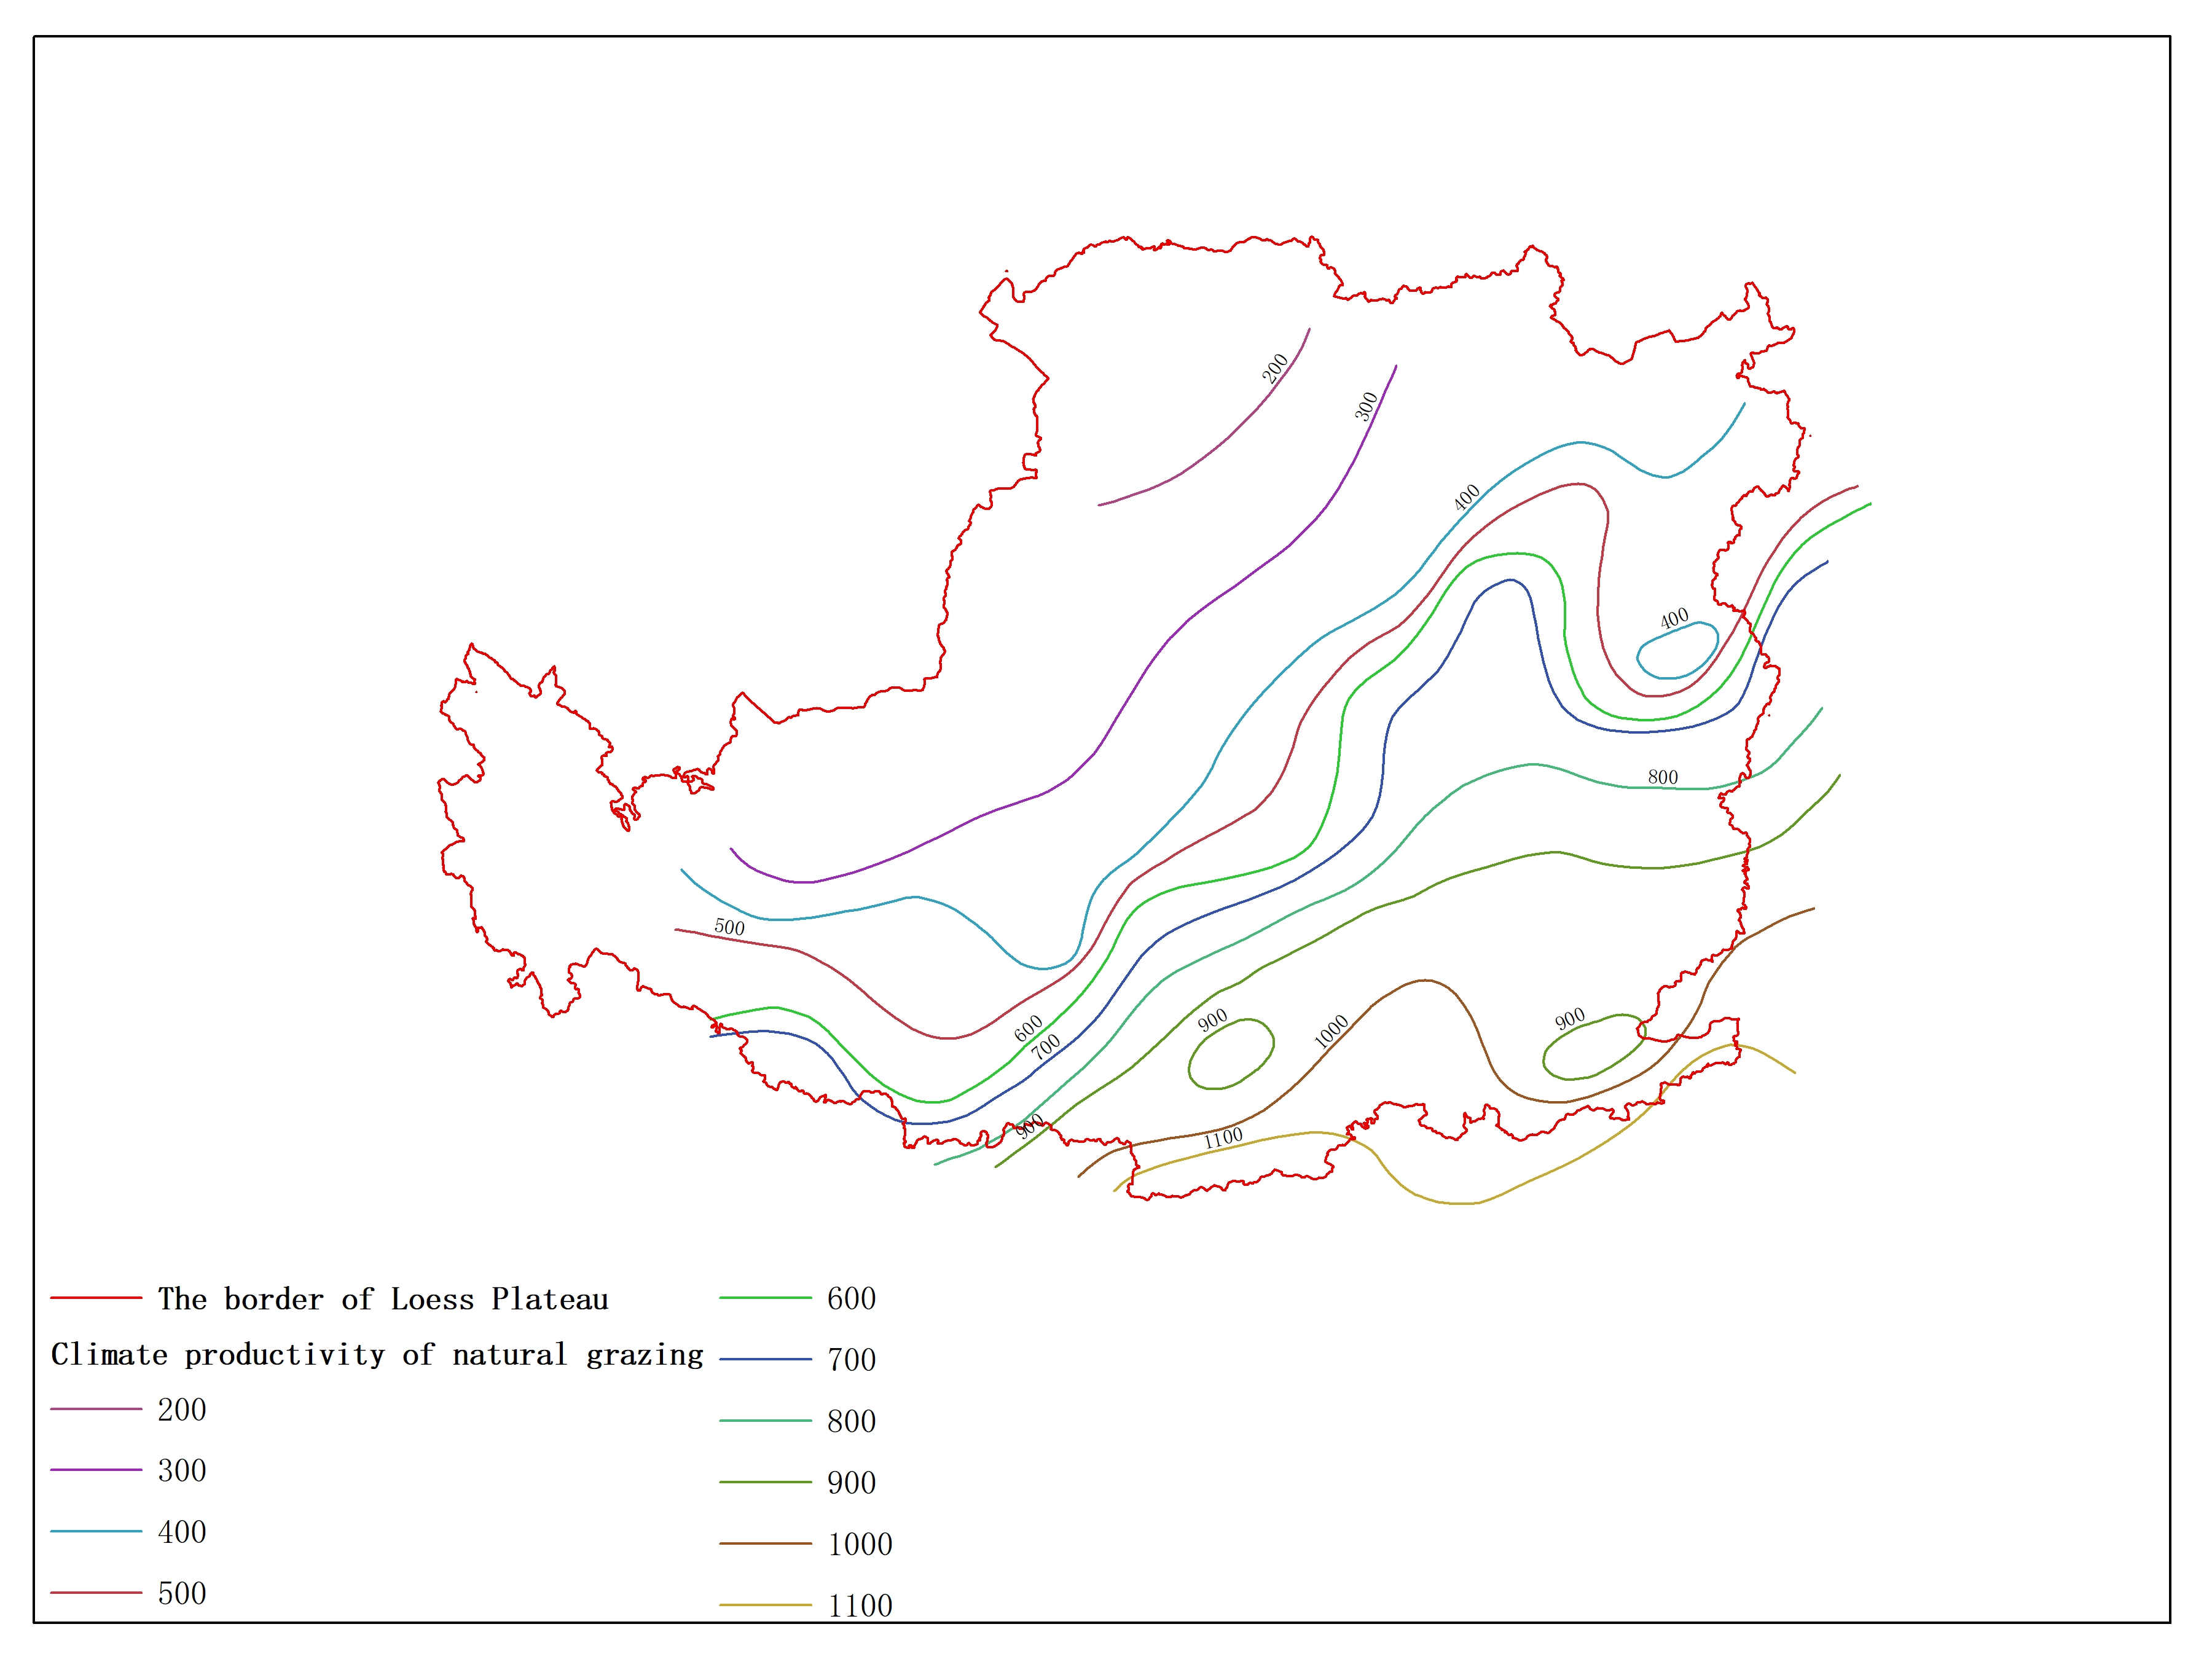 Agricultural climate resource atlas of Loess Plateau-Climate productivity of natural grazing